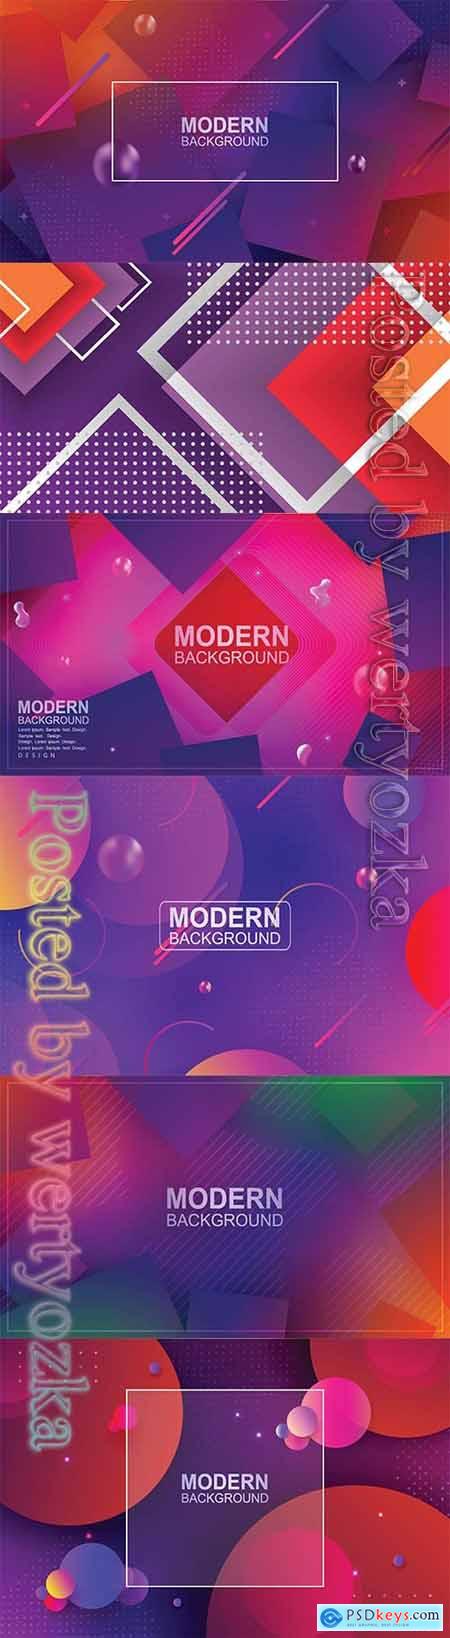 Abstract luxury vector backgrounds with different shapes # 5